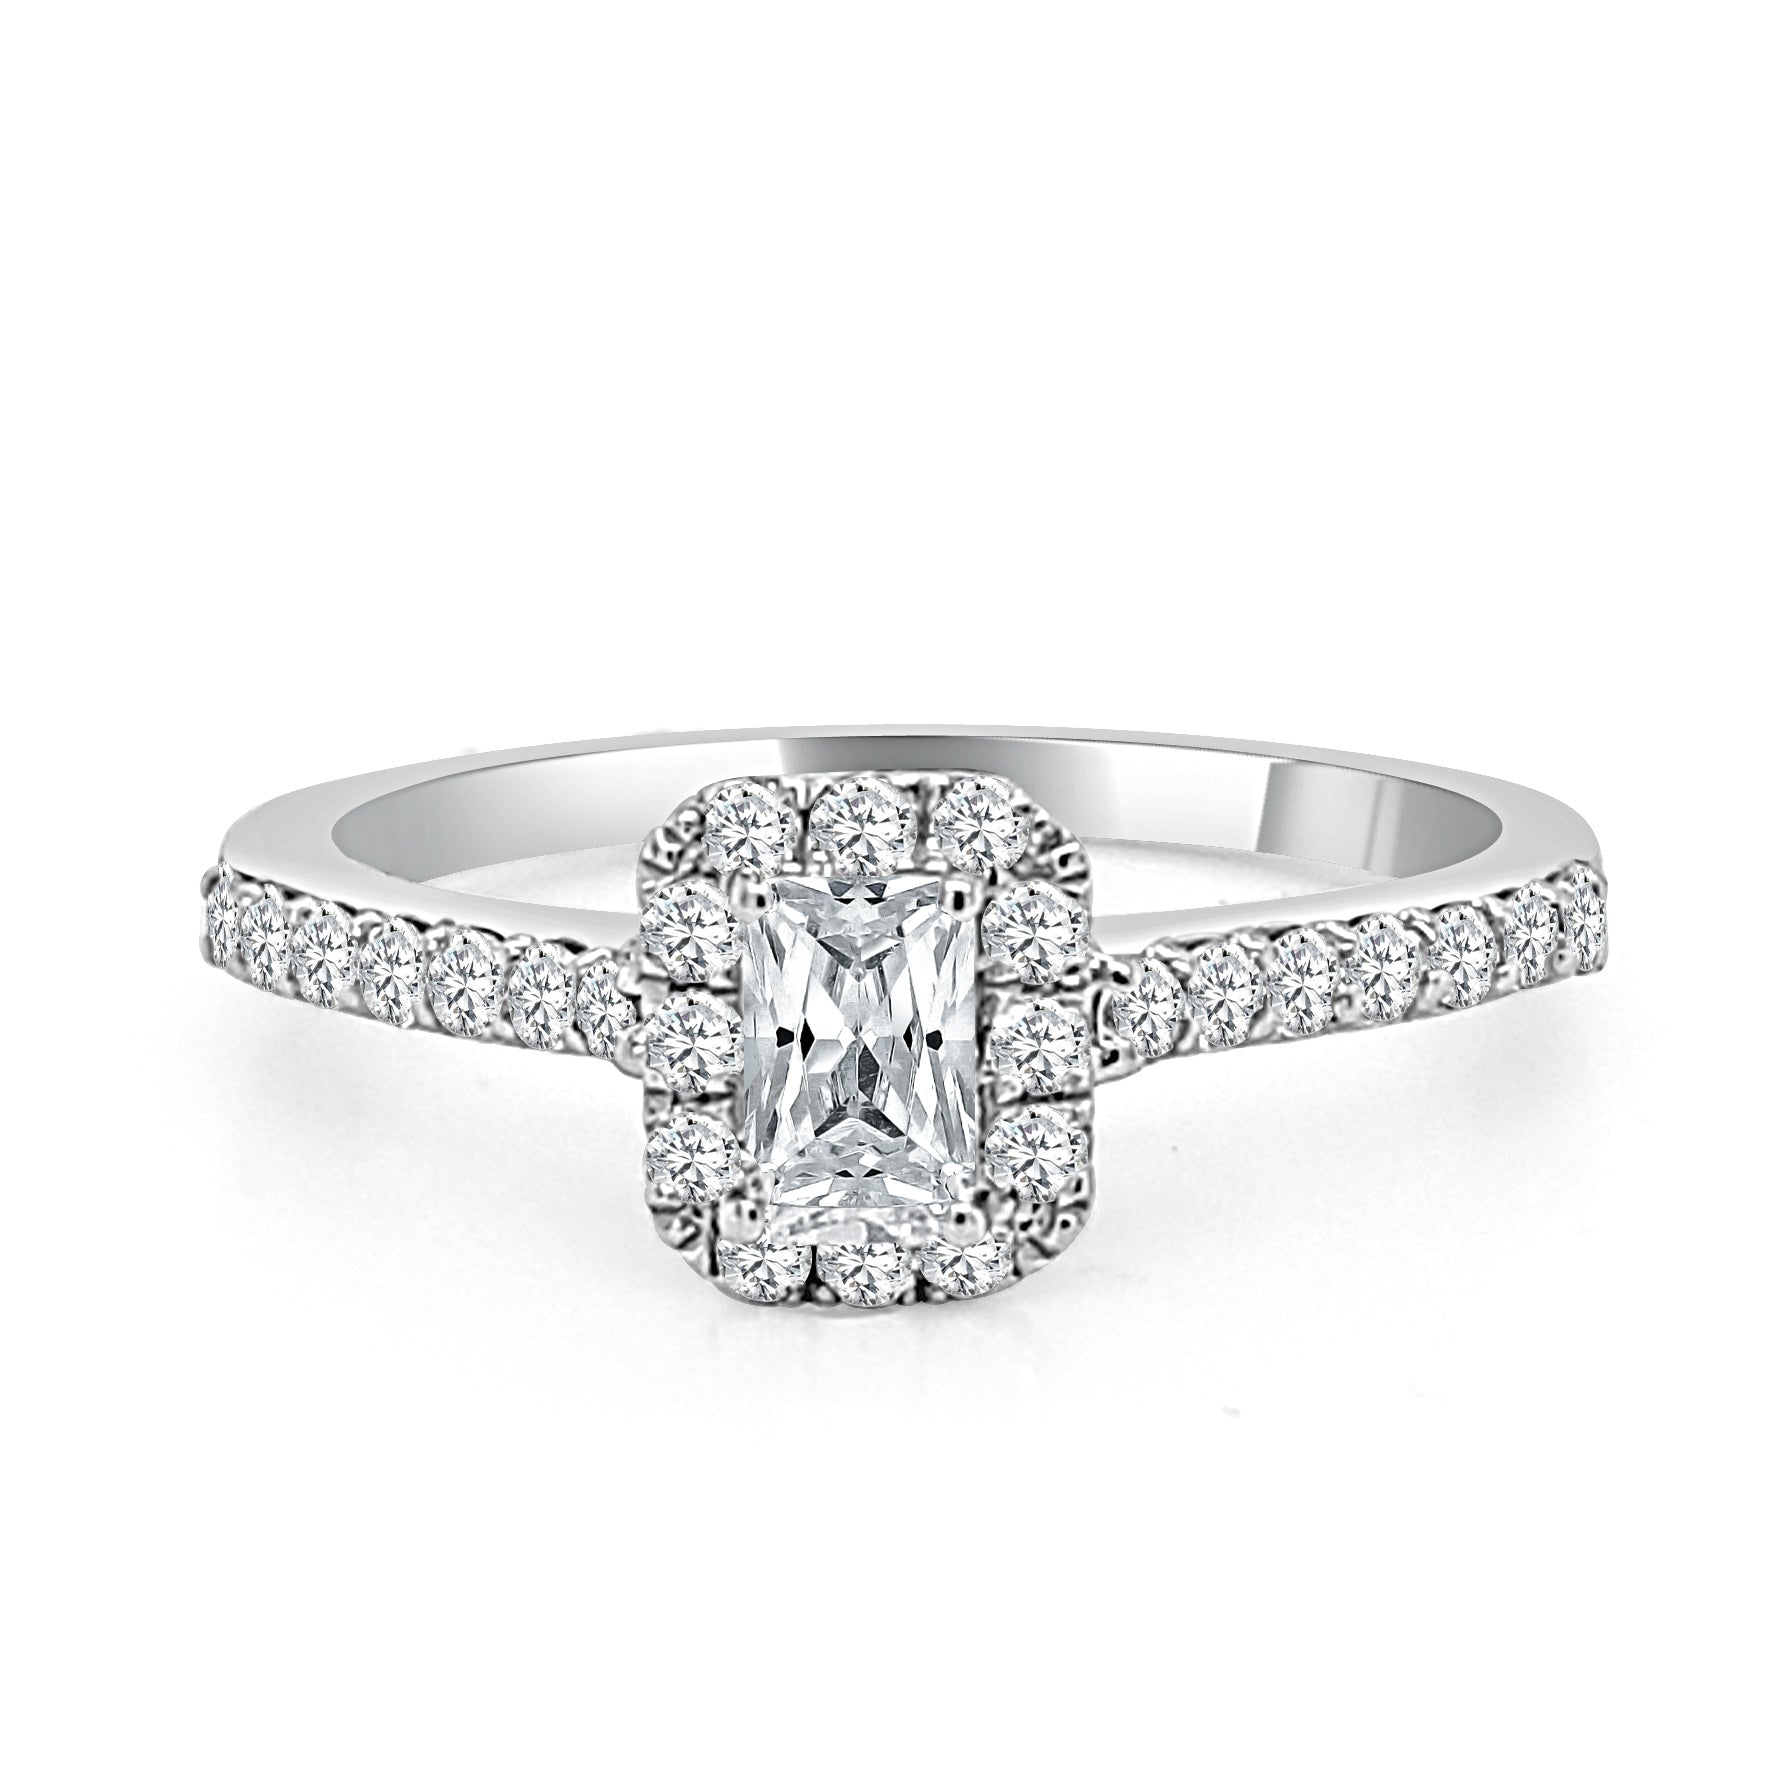 Halo Prong Set Diamond Engagement Ring made in 14k White gold  (Total diamond weight 1 1/4 carat)-Emerald